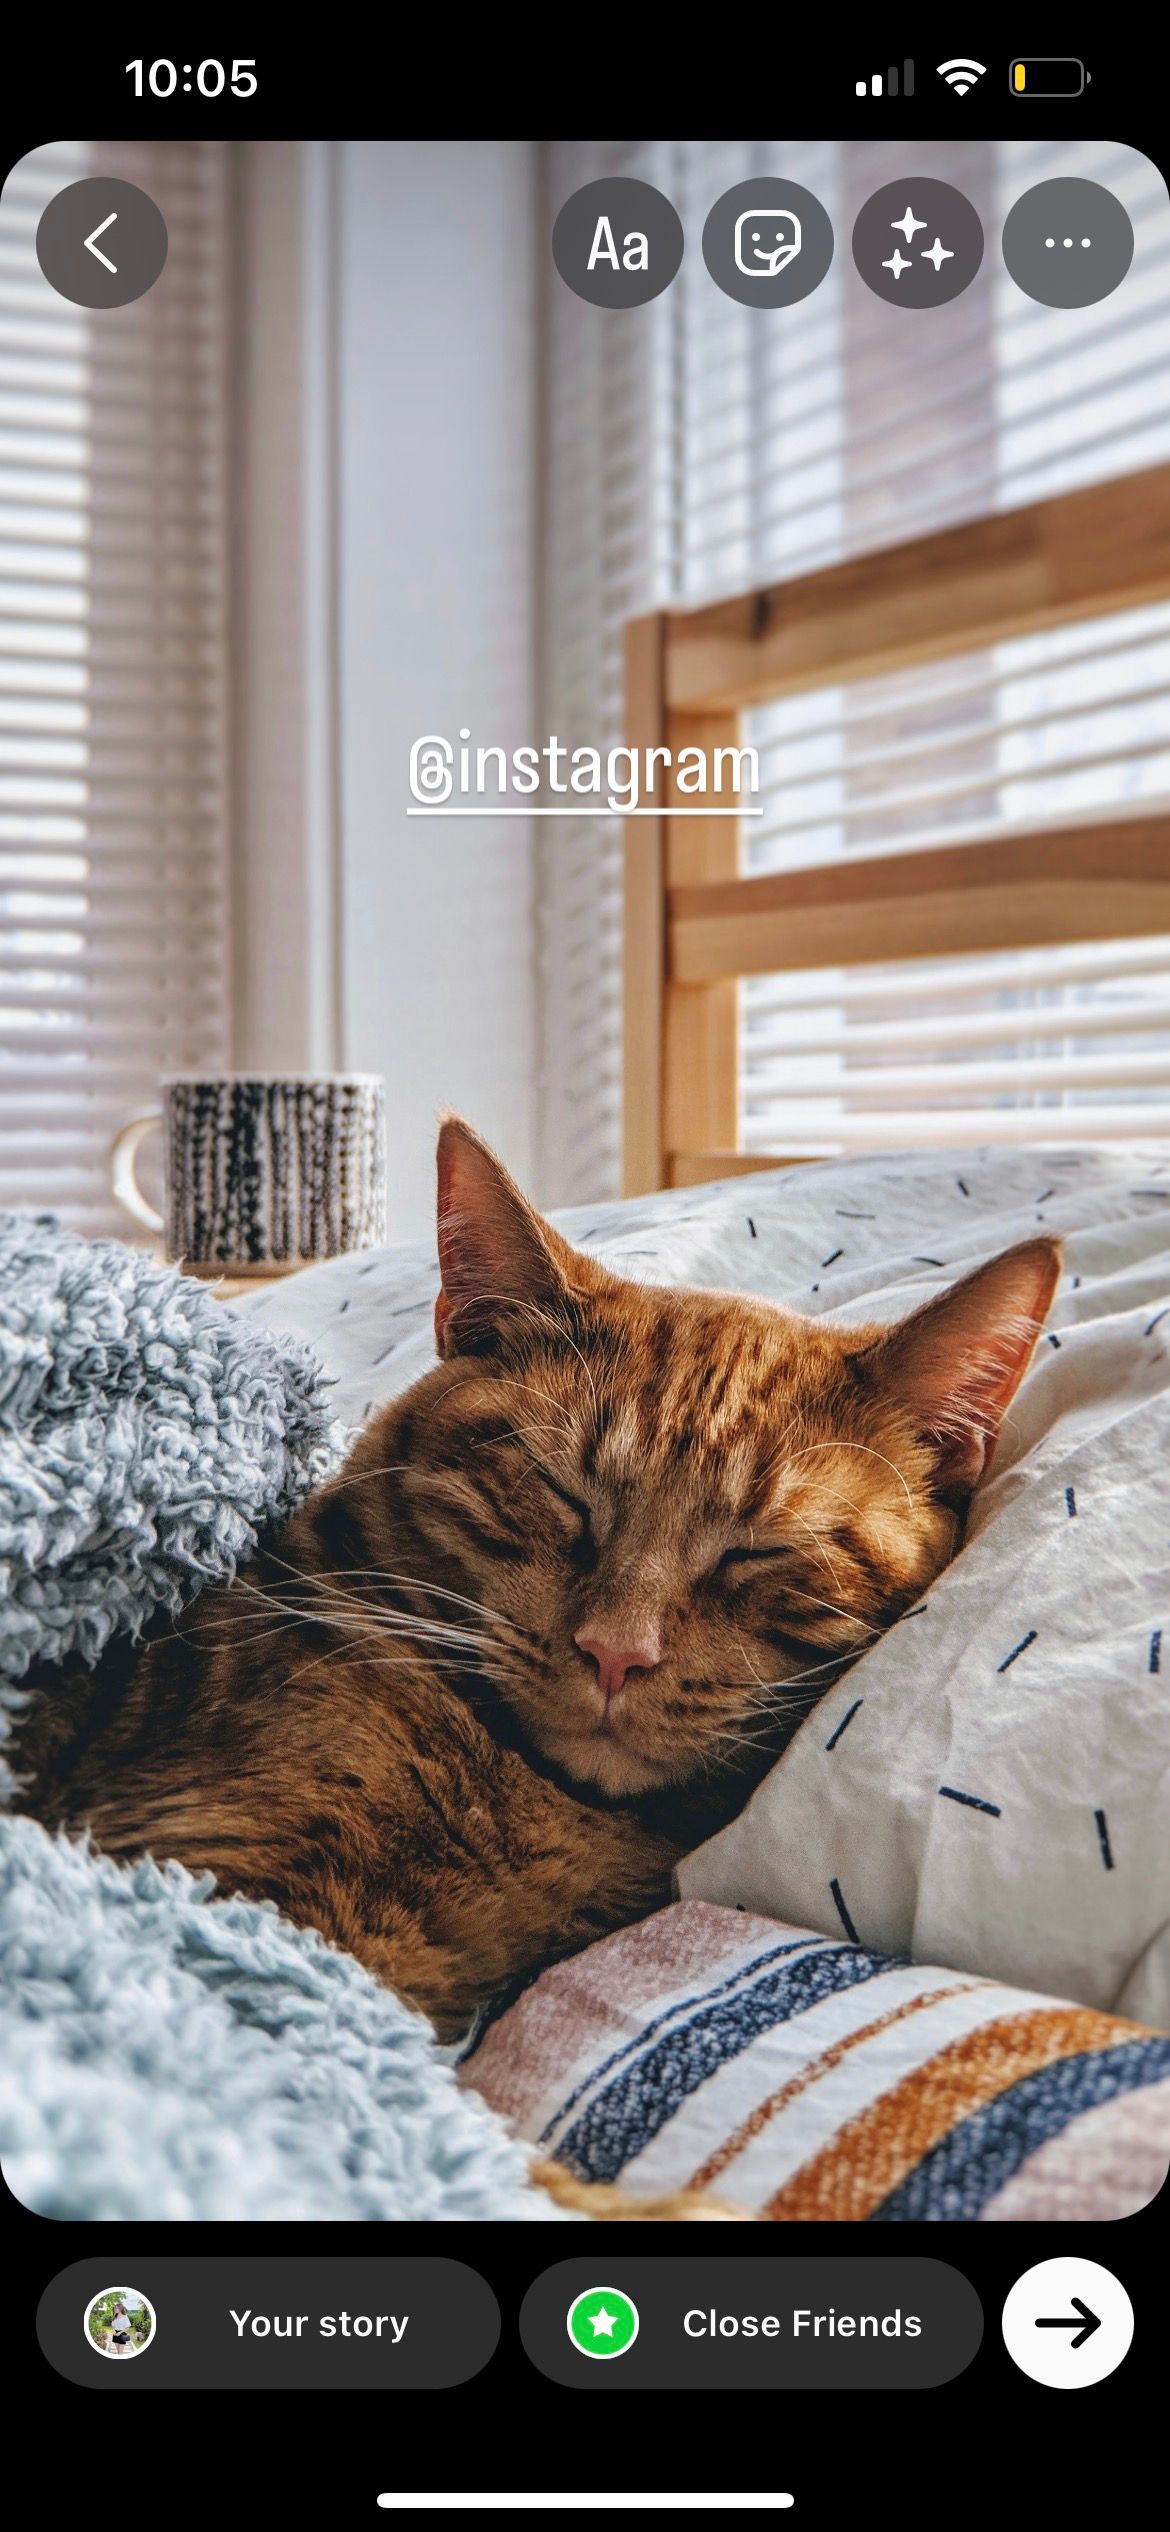 username mention in instagram story showing cat picture